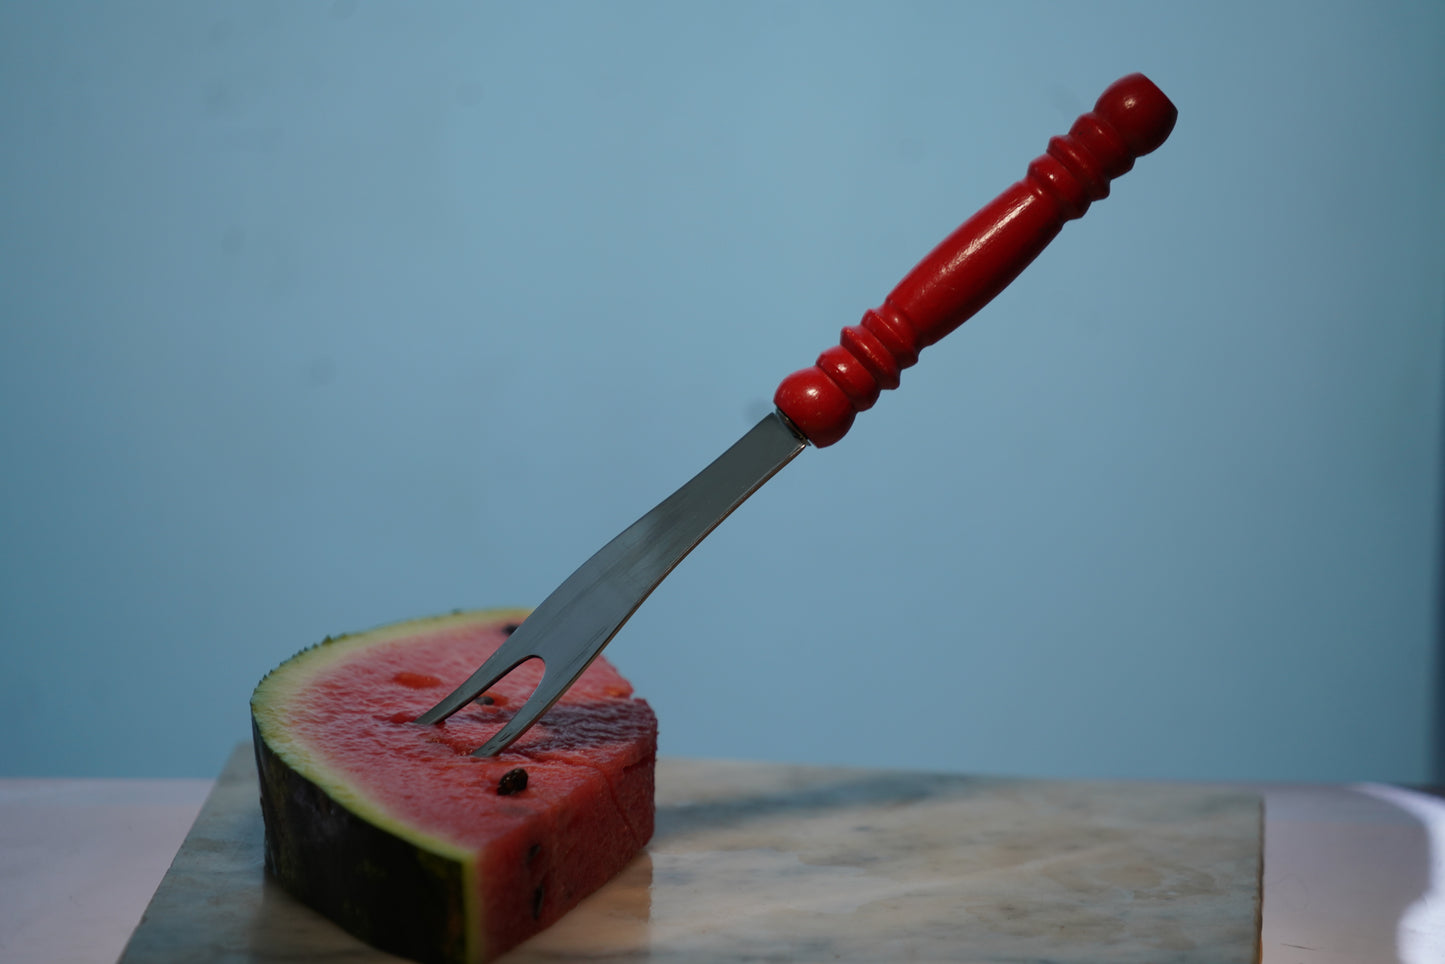 Meat fork with red handle